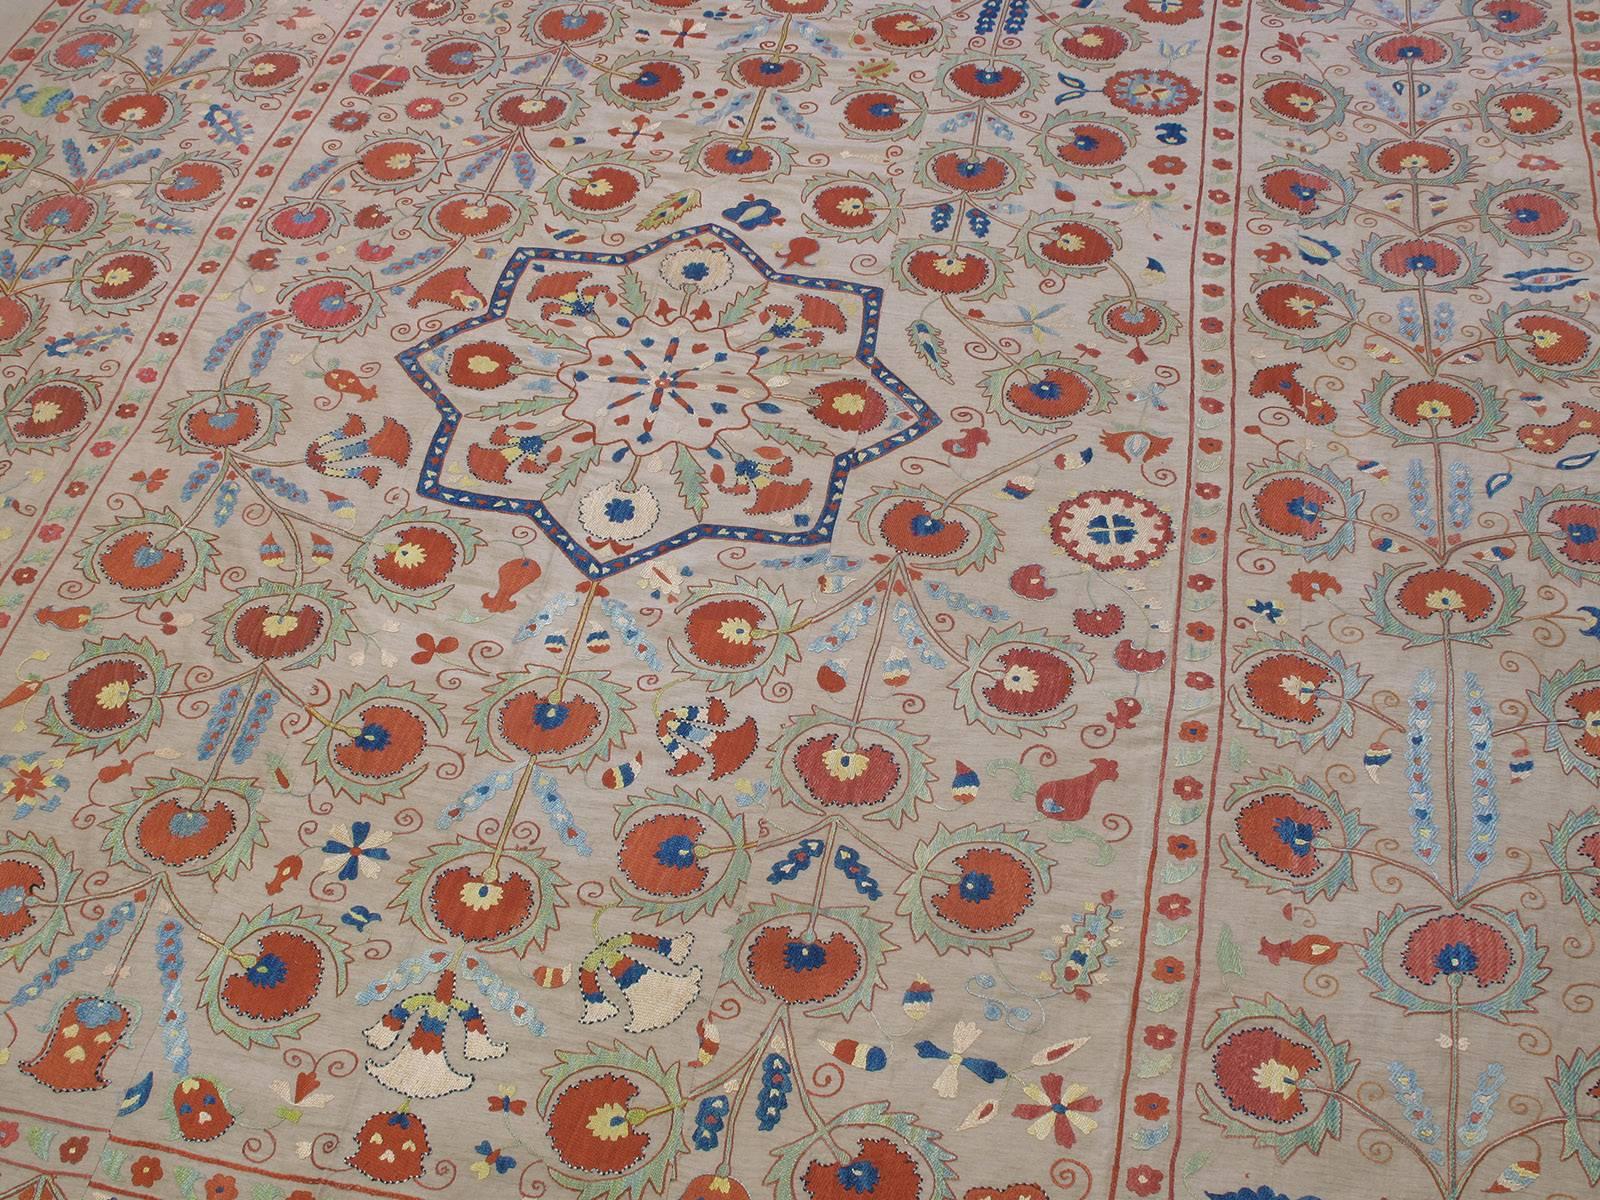 A beautiful embroidered cover from Uzbekistan, created in the 